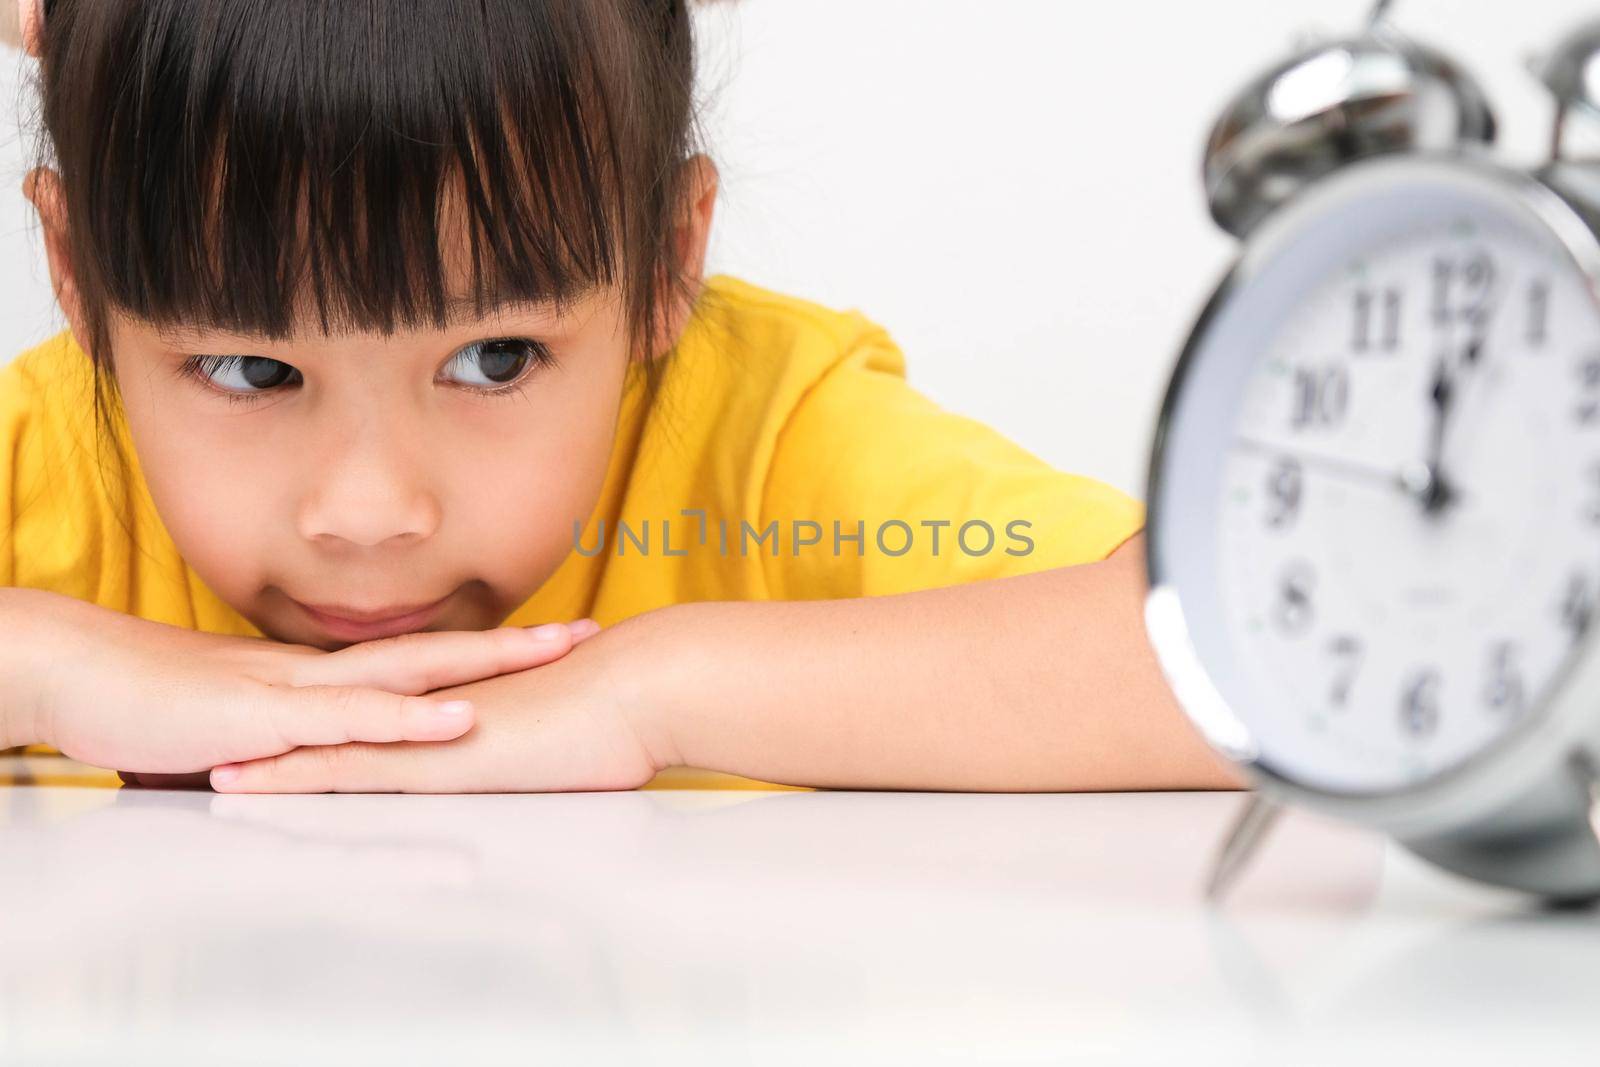 Cute dark haired girl puts her hand under her chin and looks at a vintage alarm clock while sitting at a table on a white background.